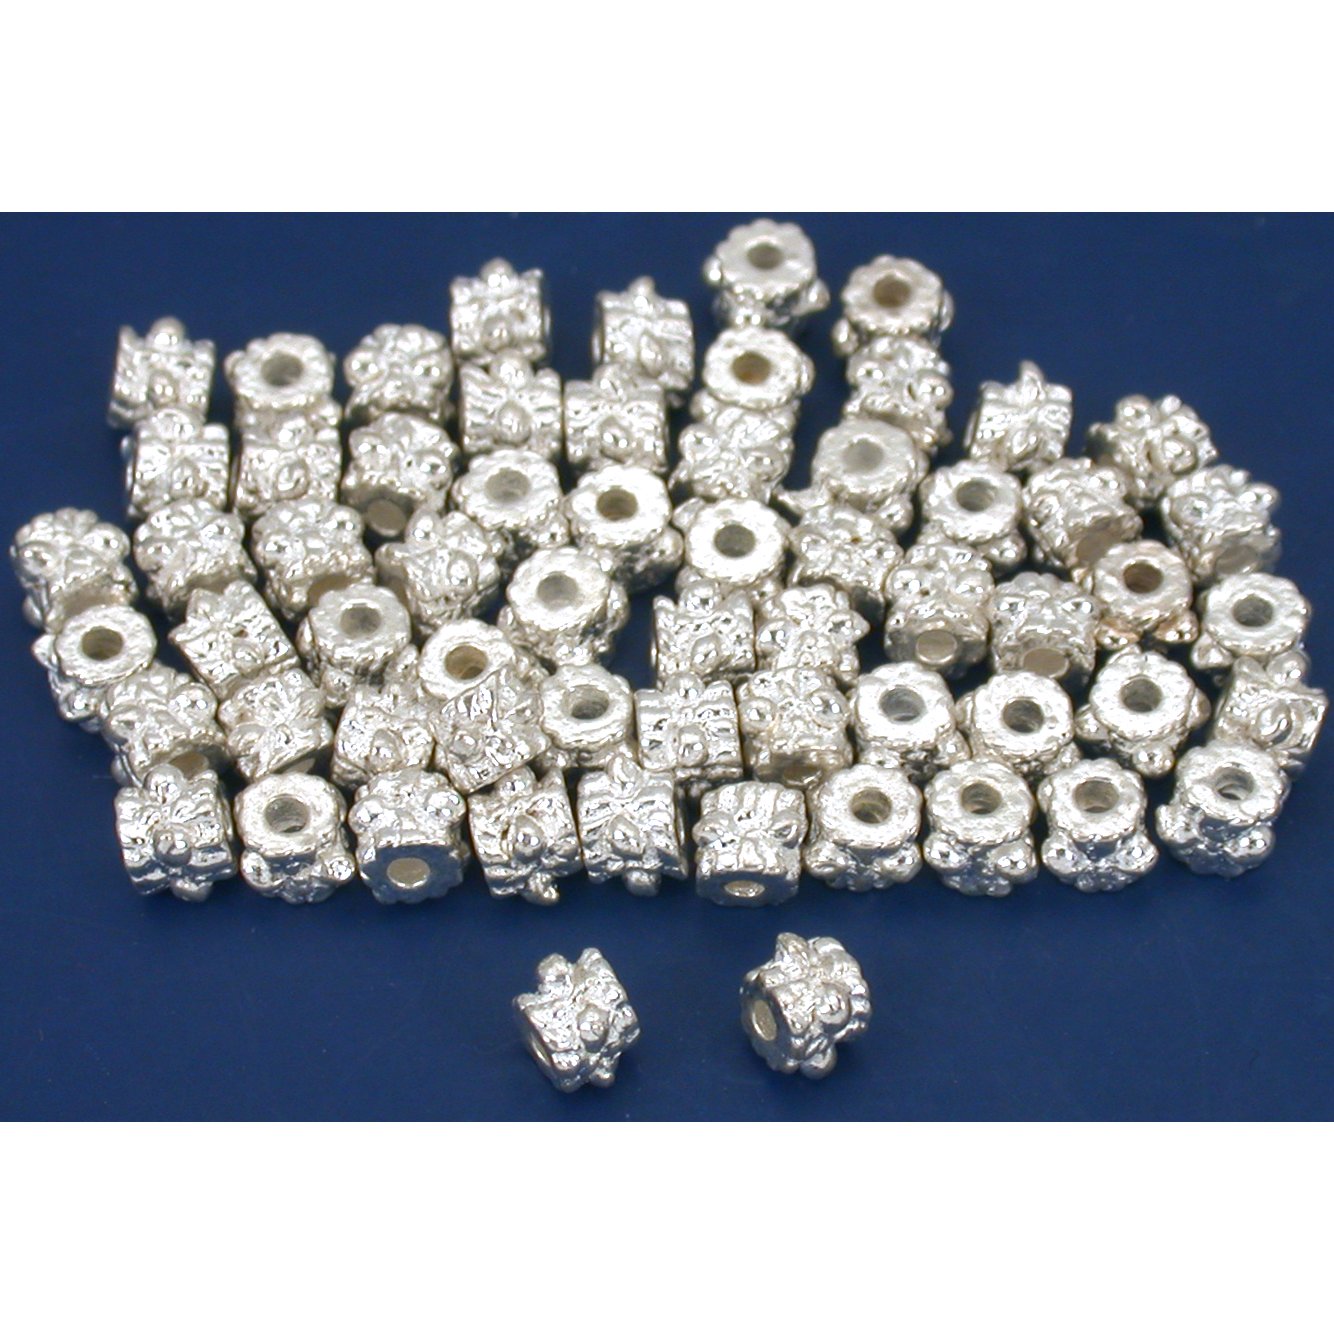 Bali Tube Spacer Beads Silver Plated 3.5mm Approx 60